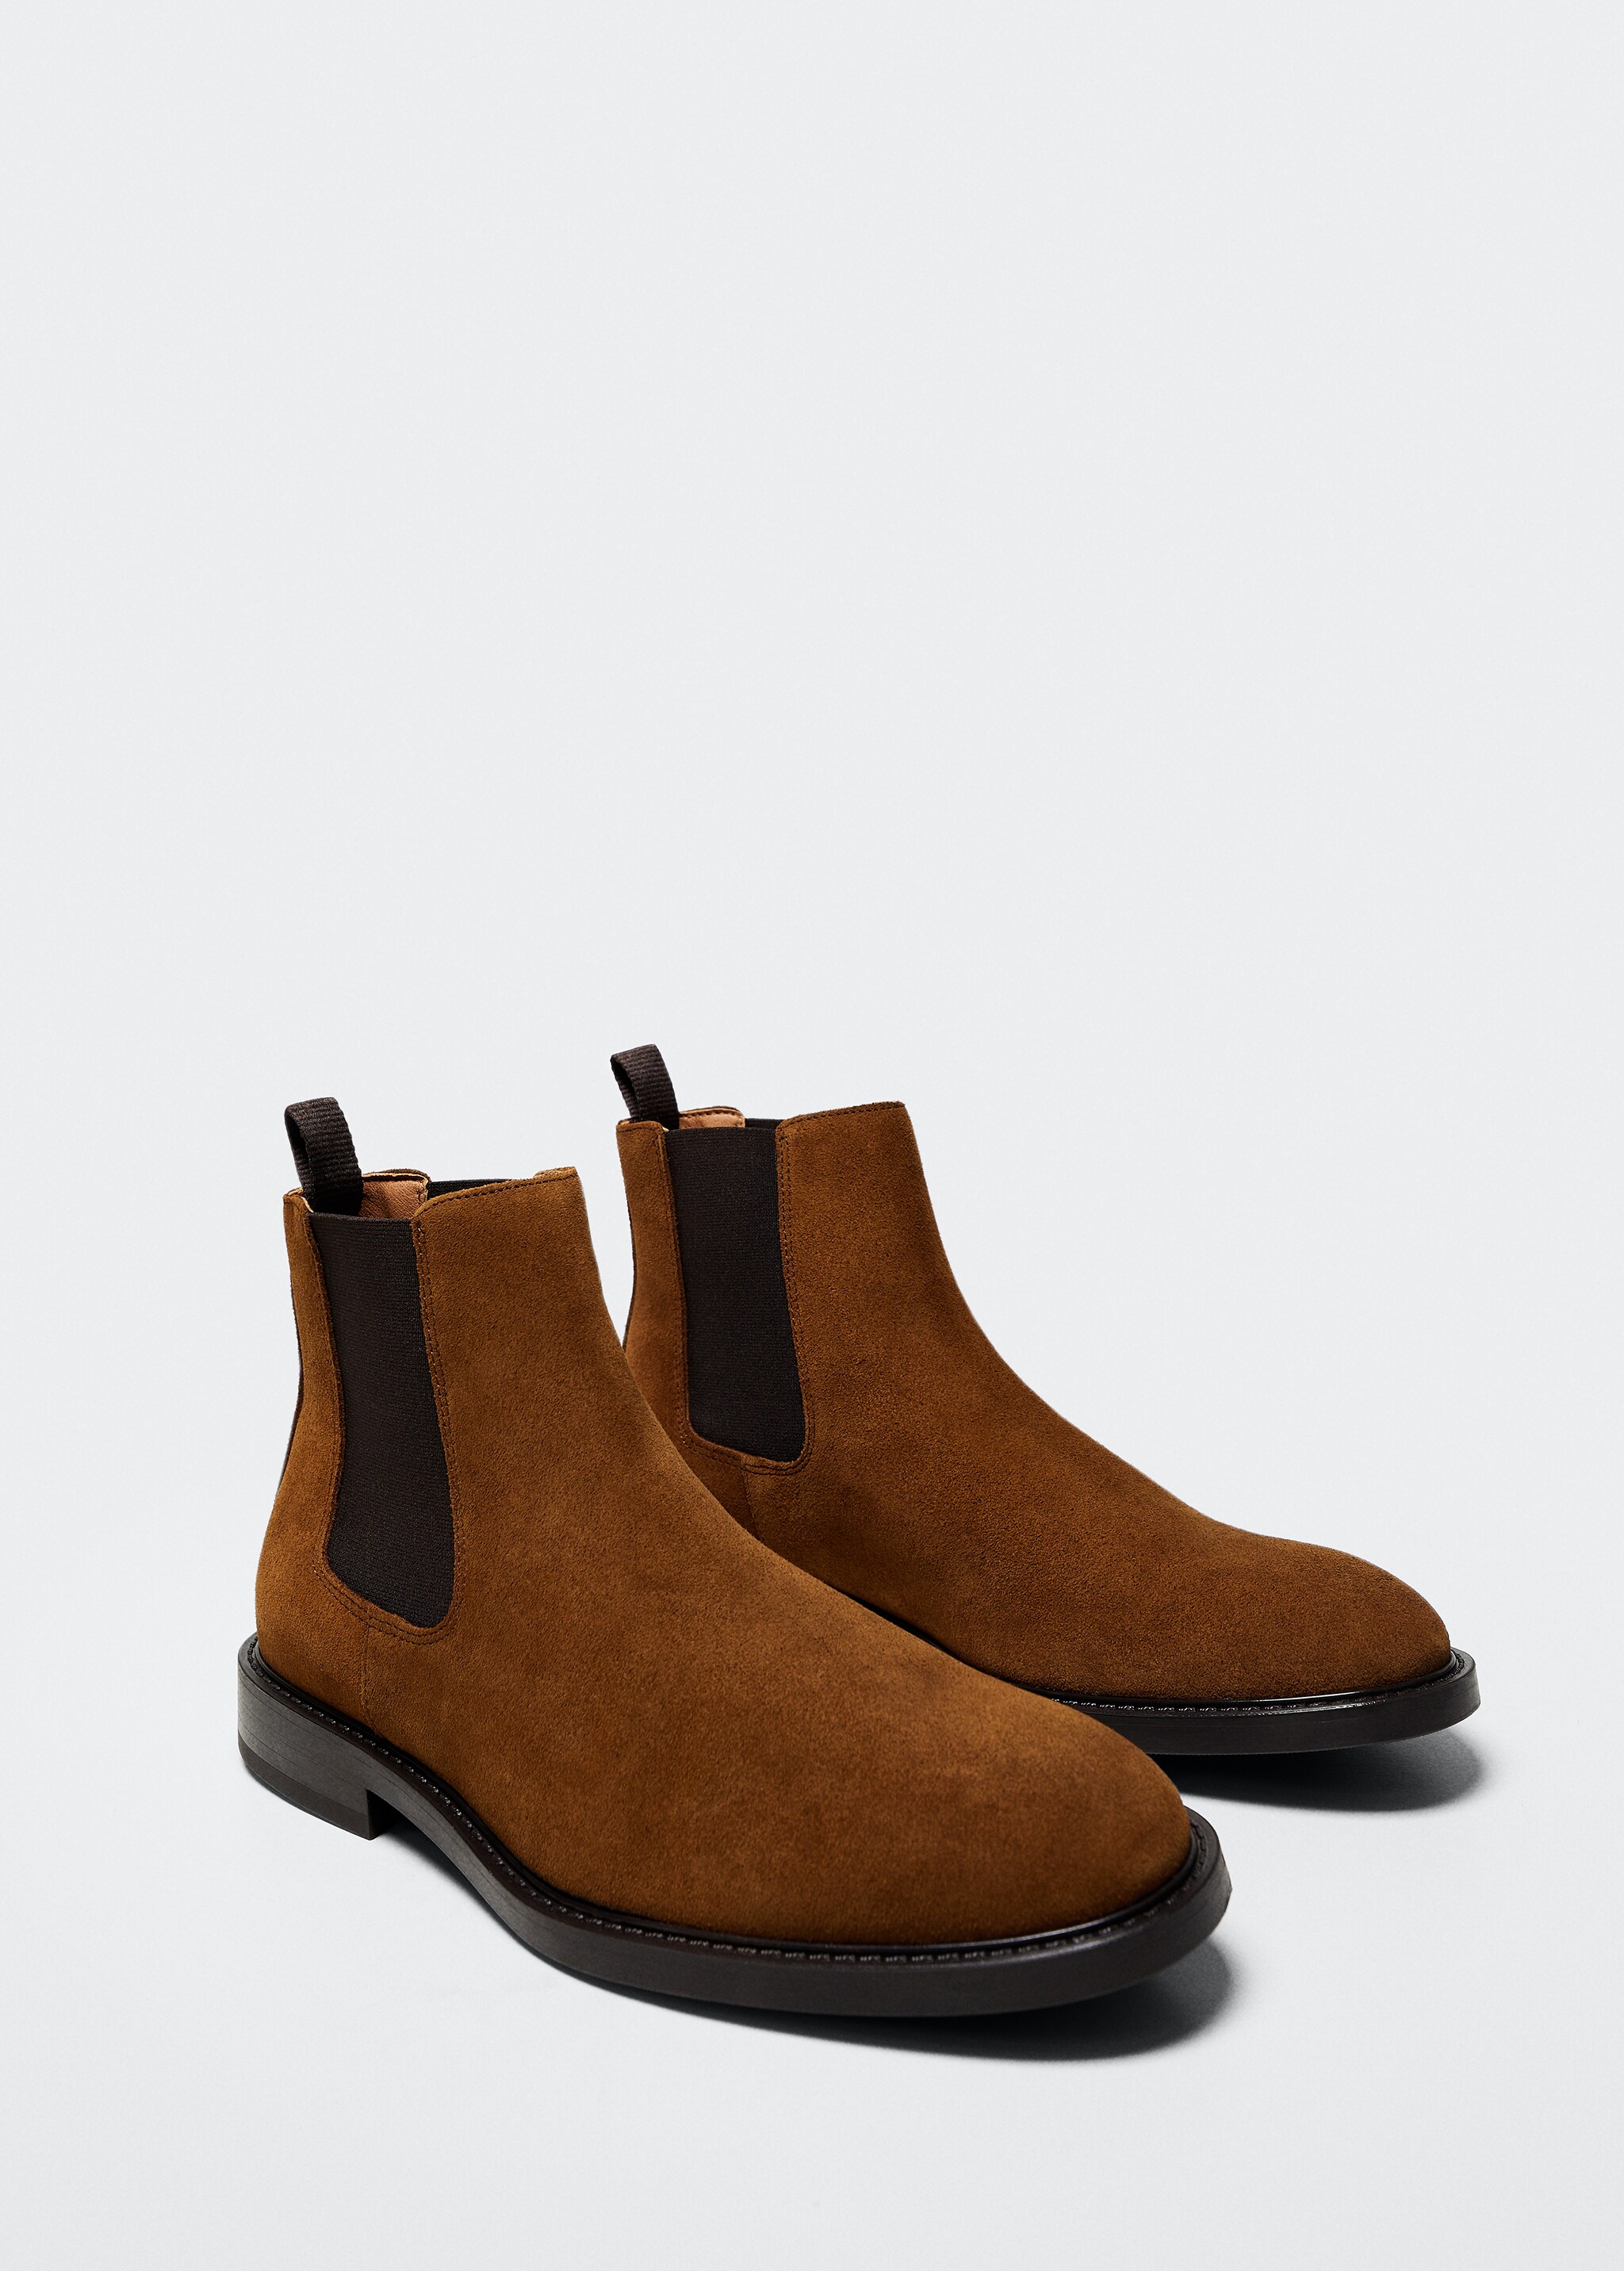 Suede Chelsea ankle boots - Medium plane